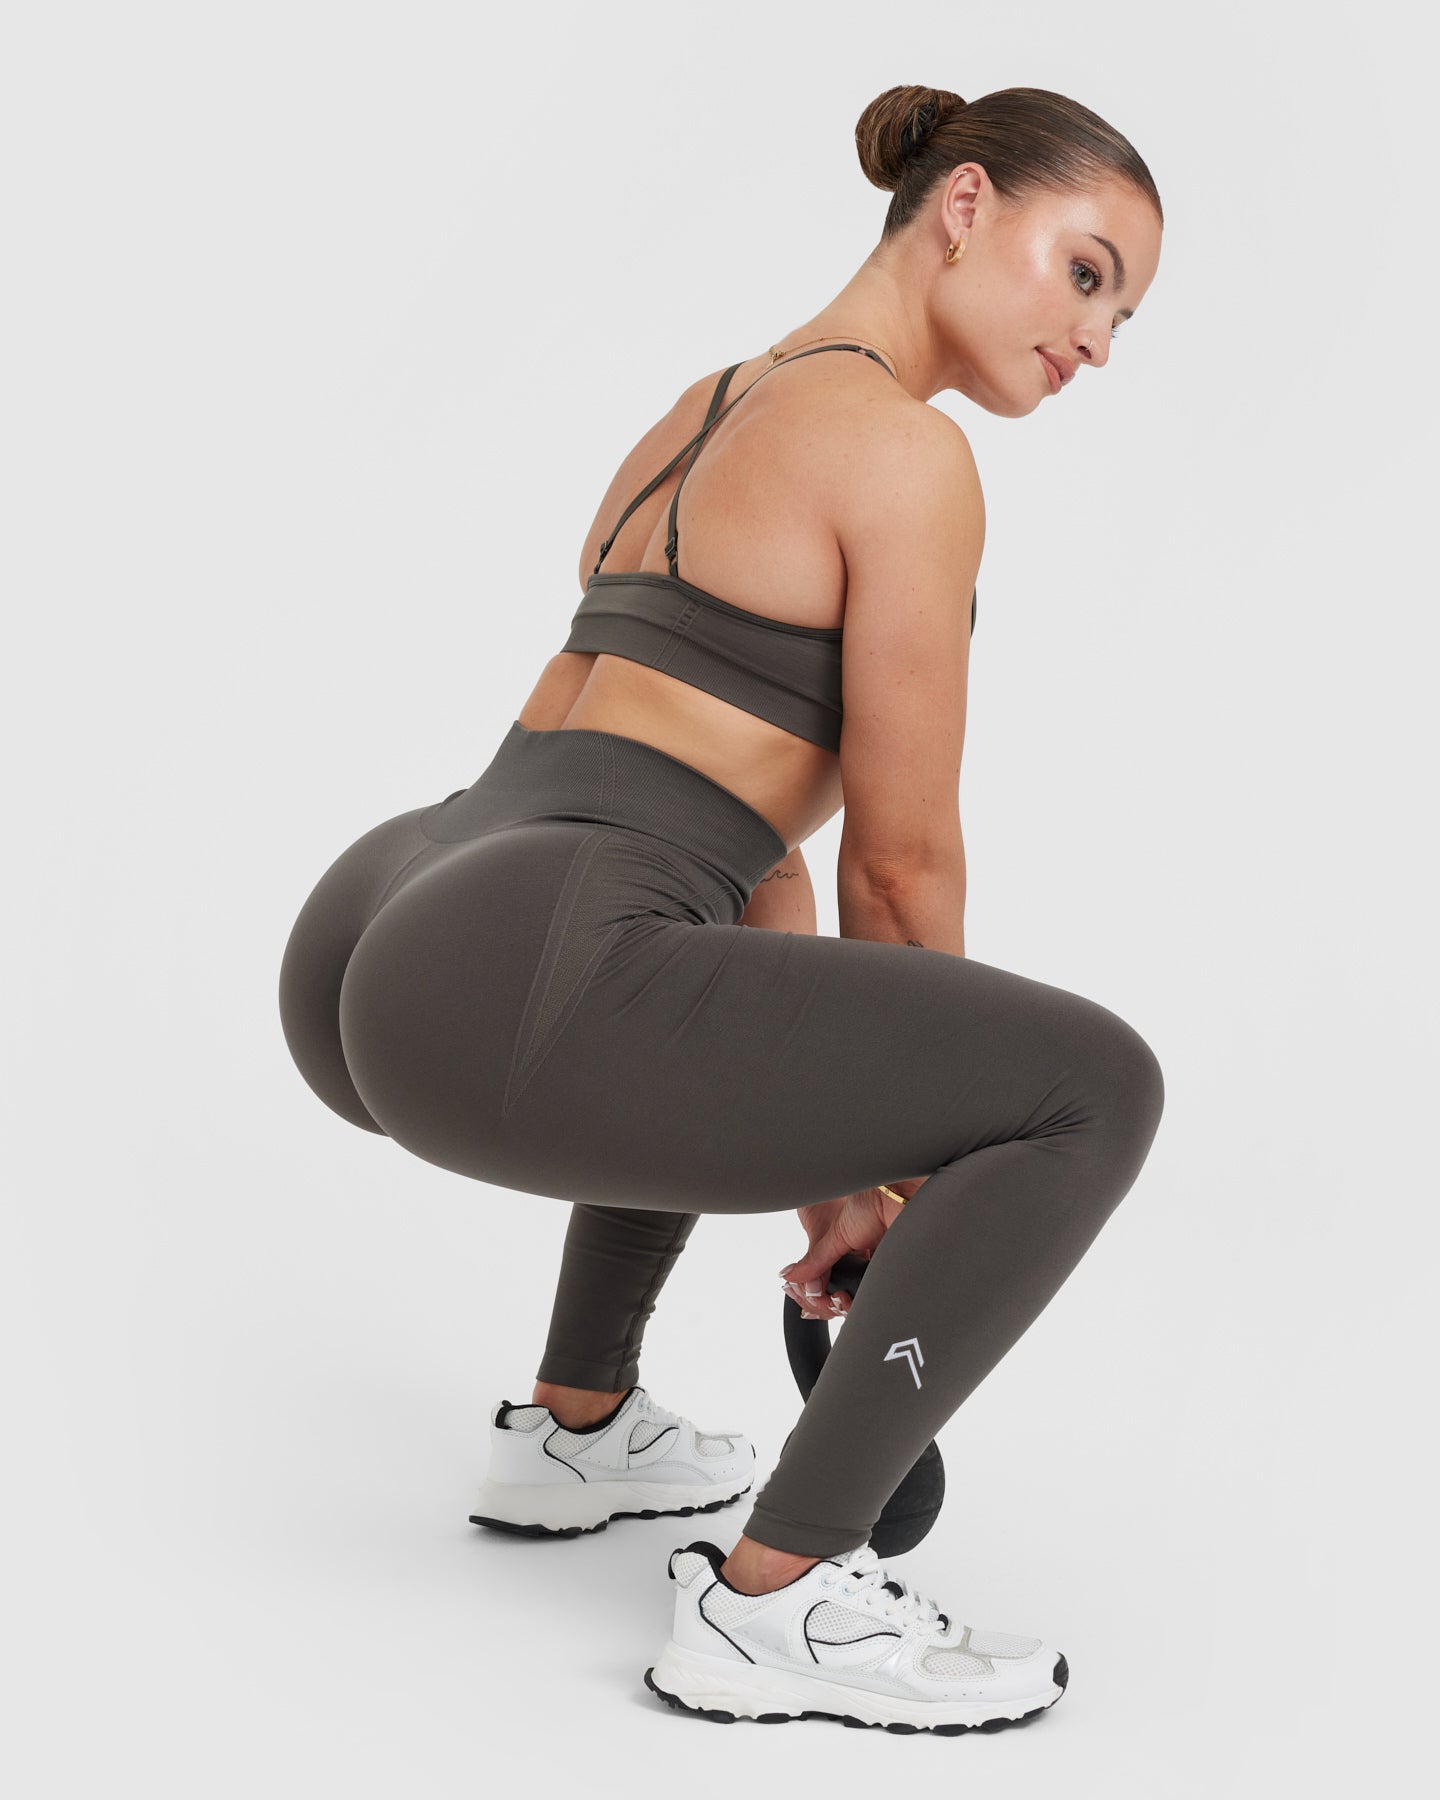 High Waist Seamless Yoga Oner Active Leggings For Women Perfect For  Running, Fitness, And Gym Workouts Nude Exercise Pants From Jiz8, $23.83